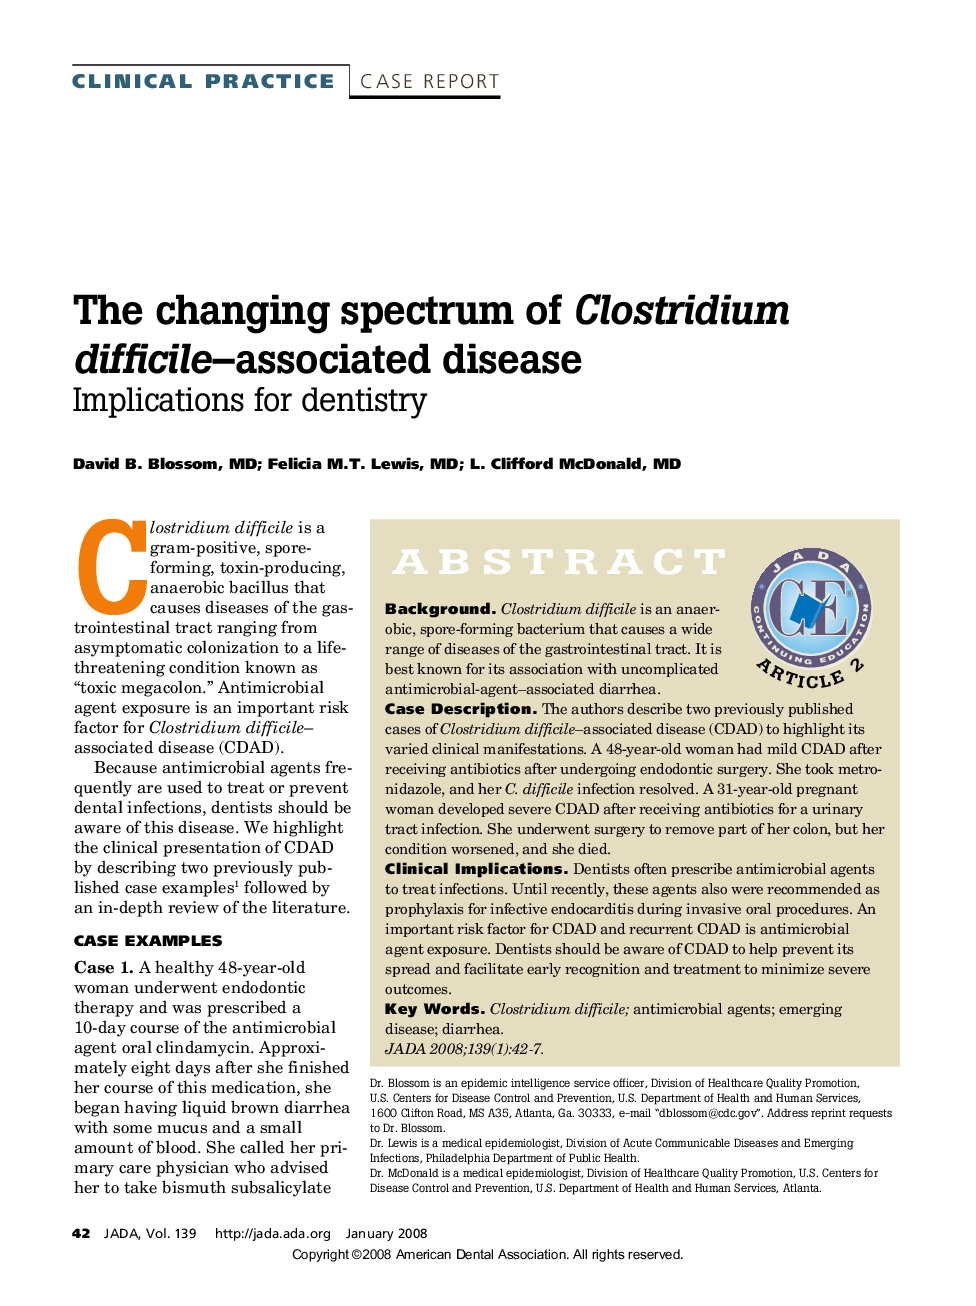 The Changing Spectrum of Clostridium Difficile–Associated Disease: Implications for Dentistry